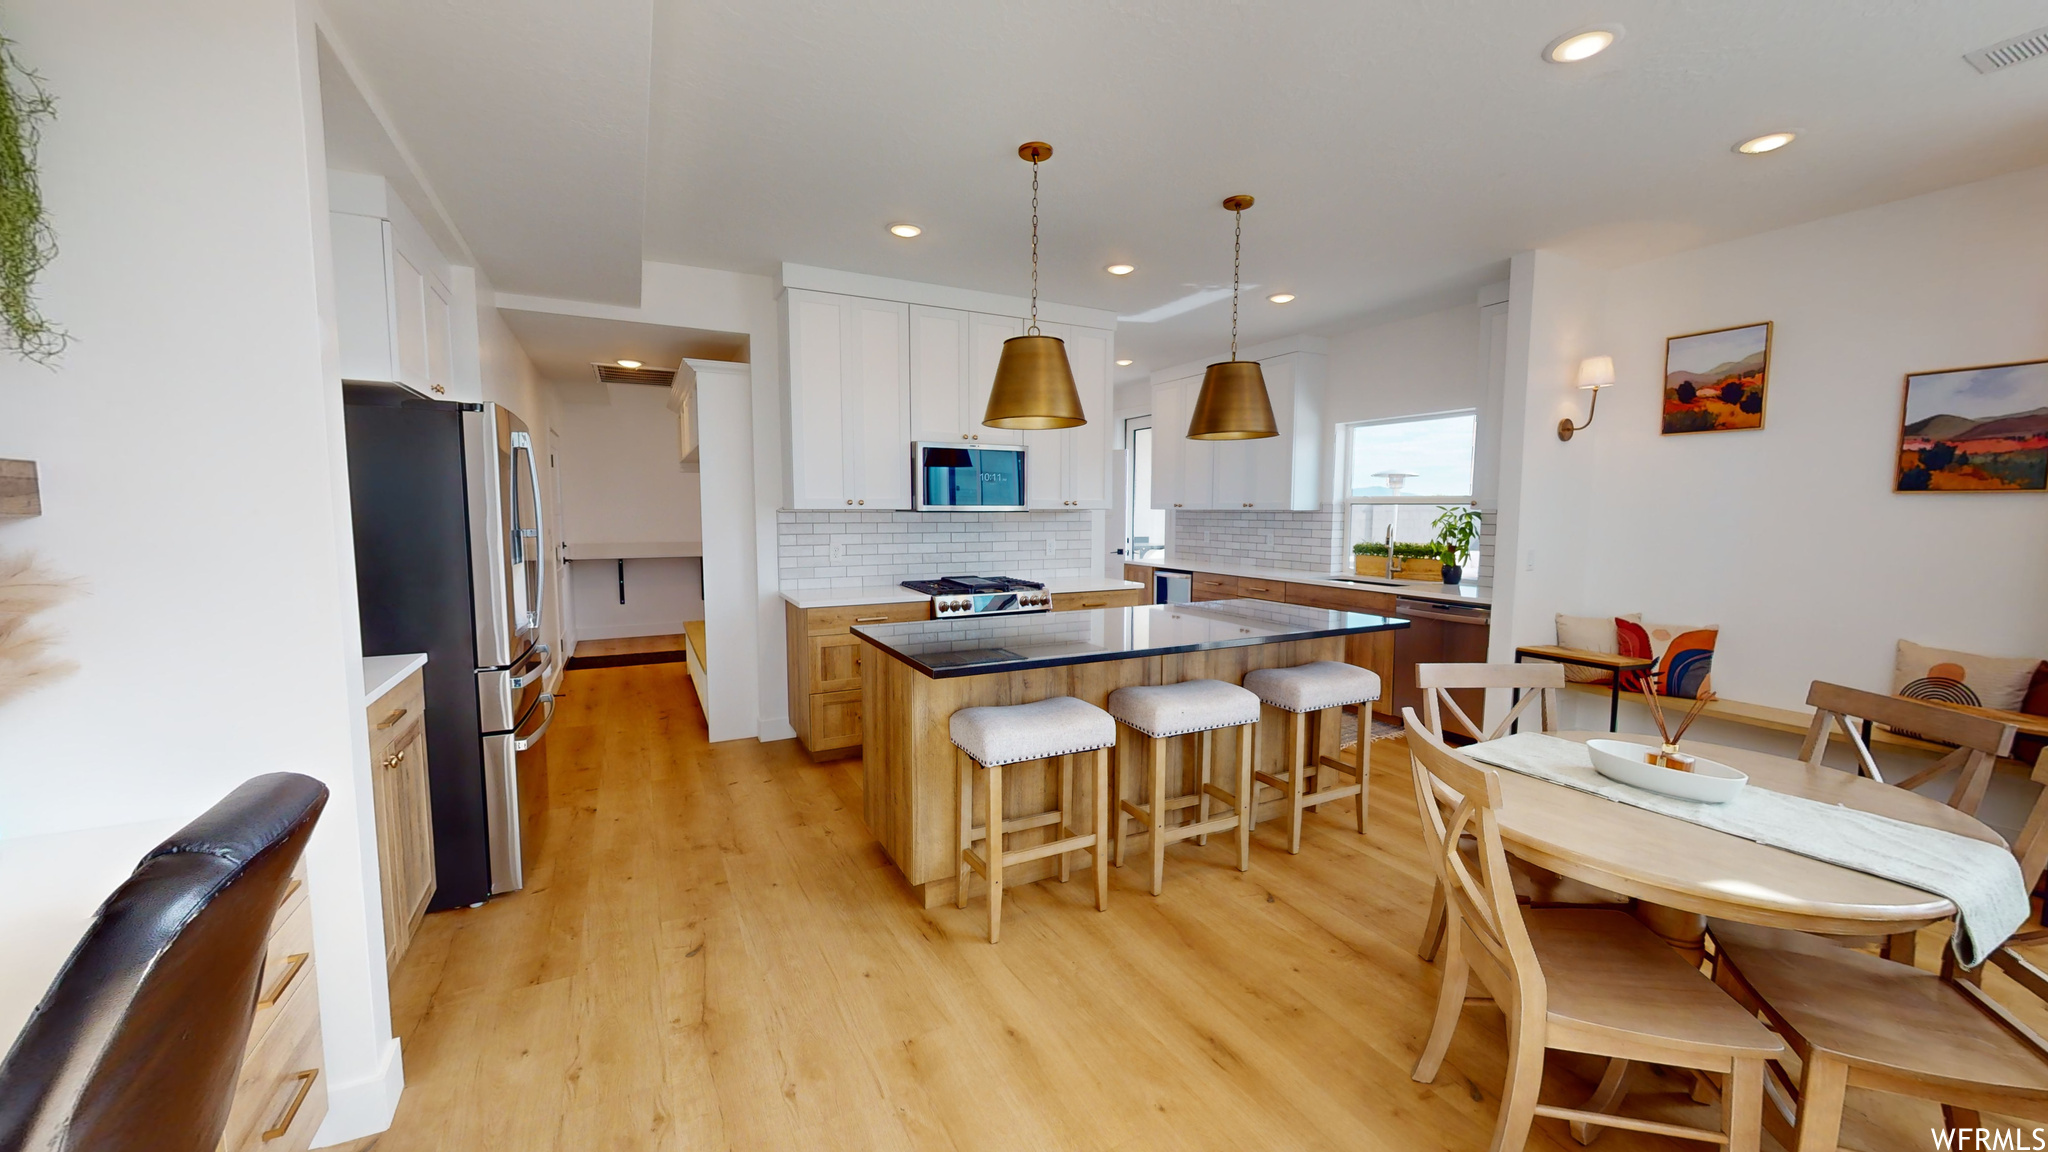 Kitchen featuring hanging light fixtures, light wood-type flooring, a center island, and white cabinets